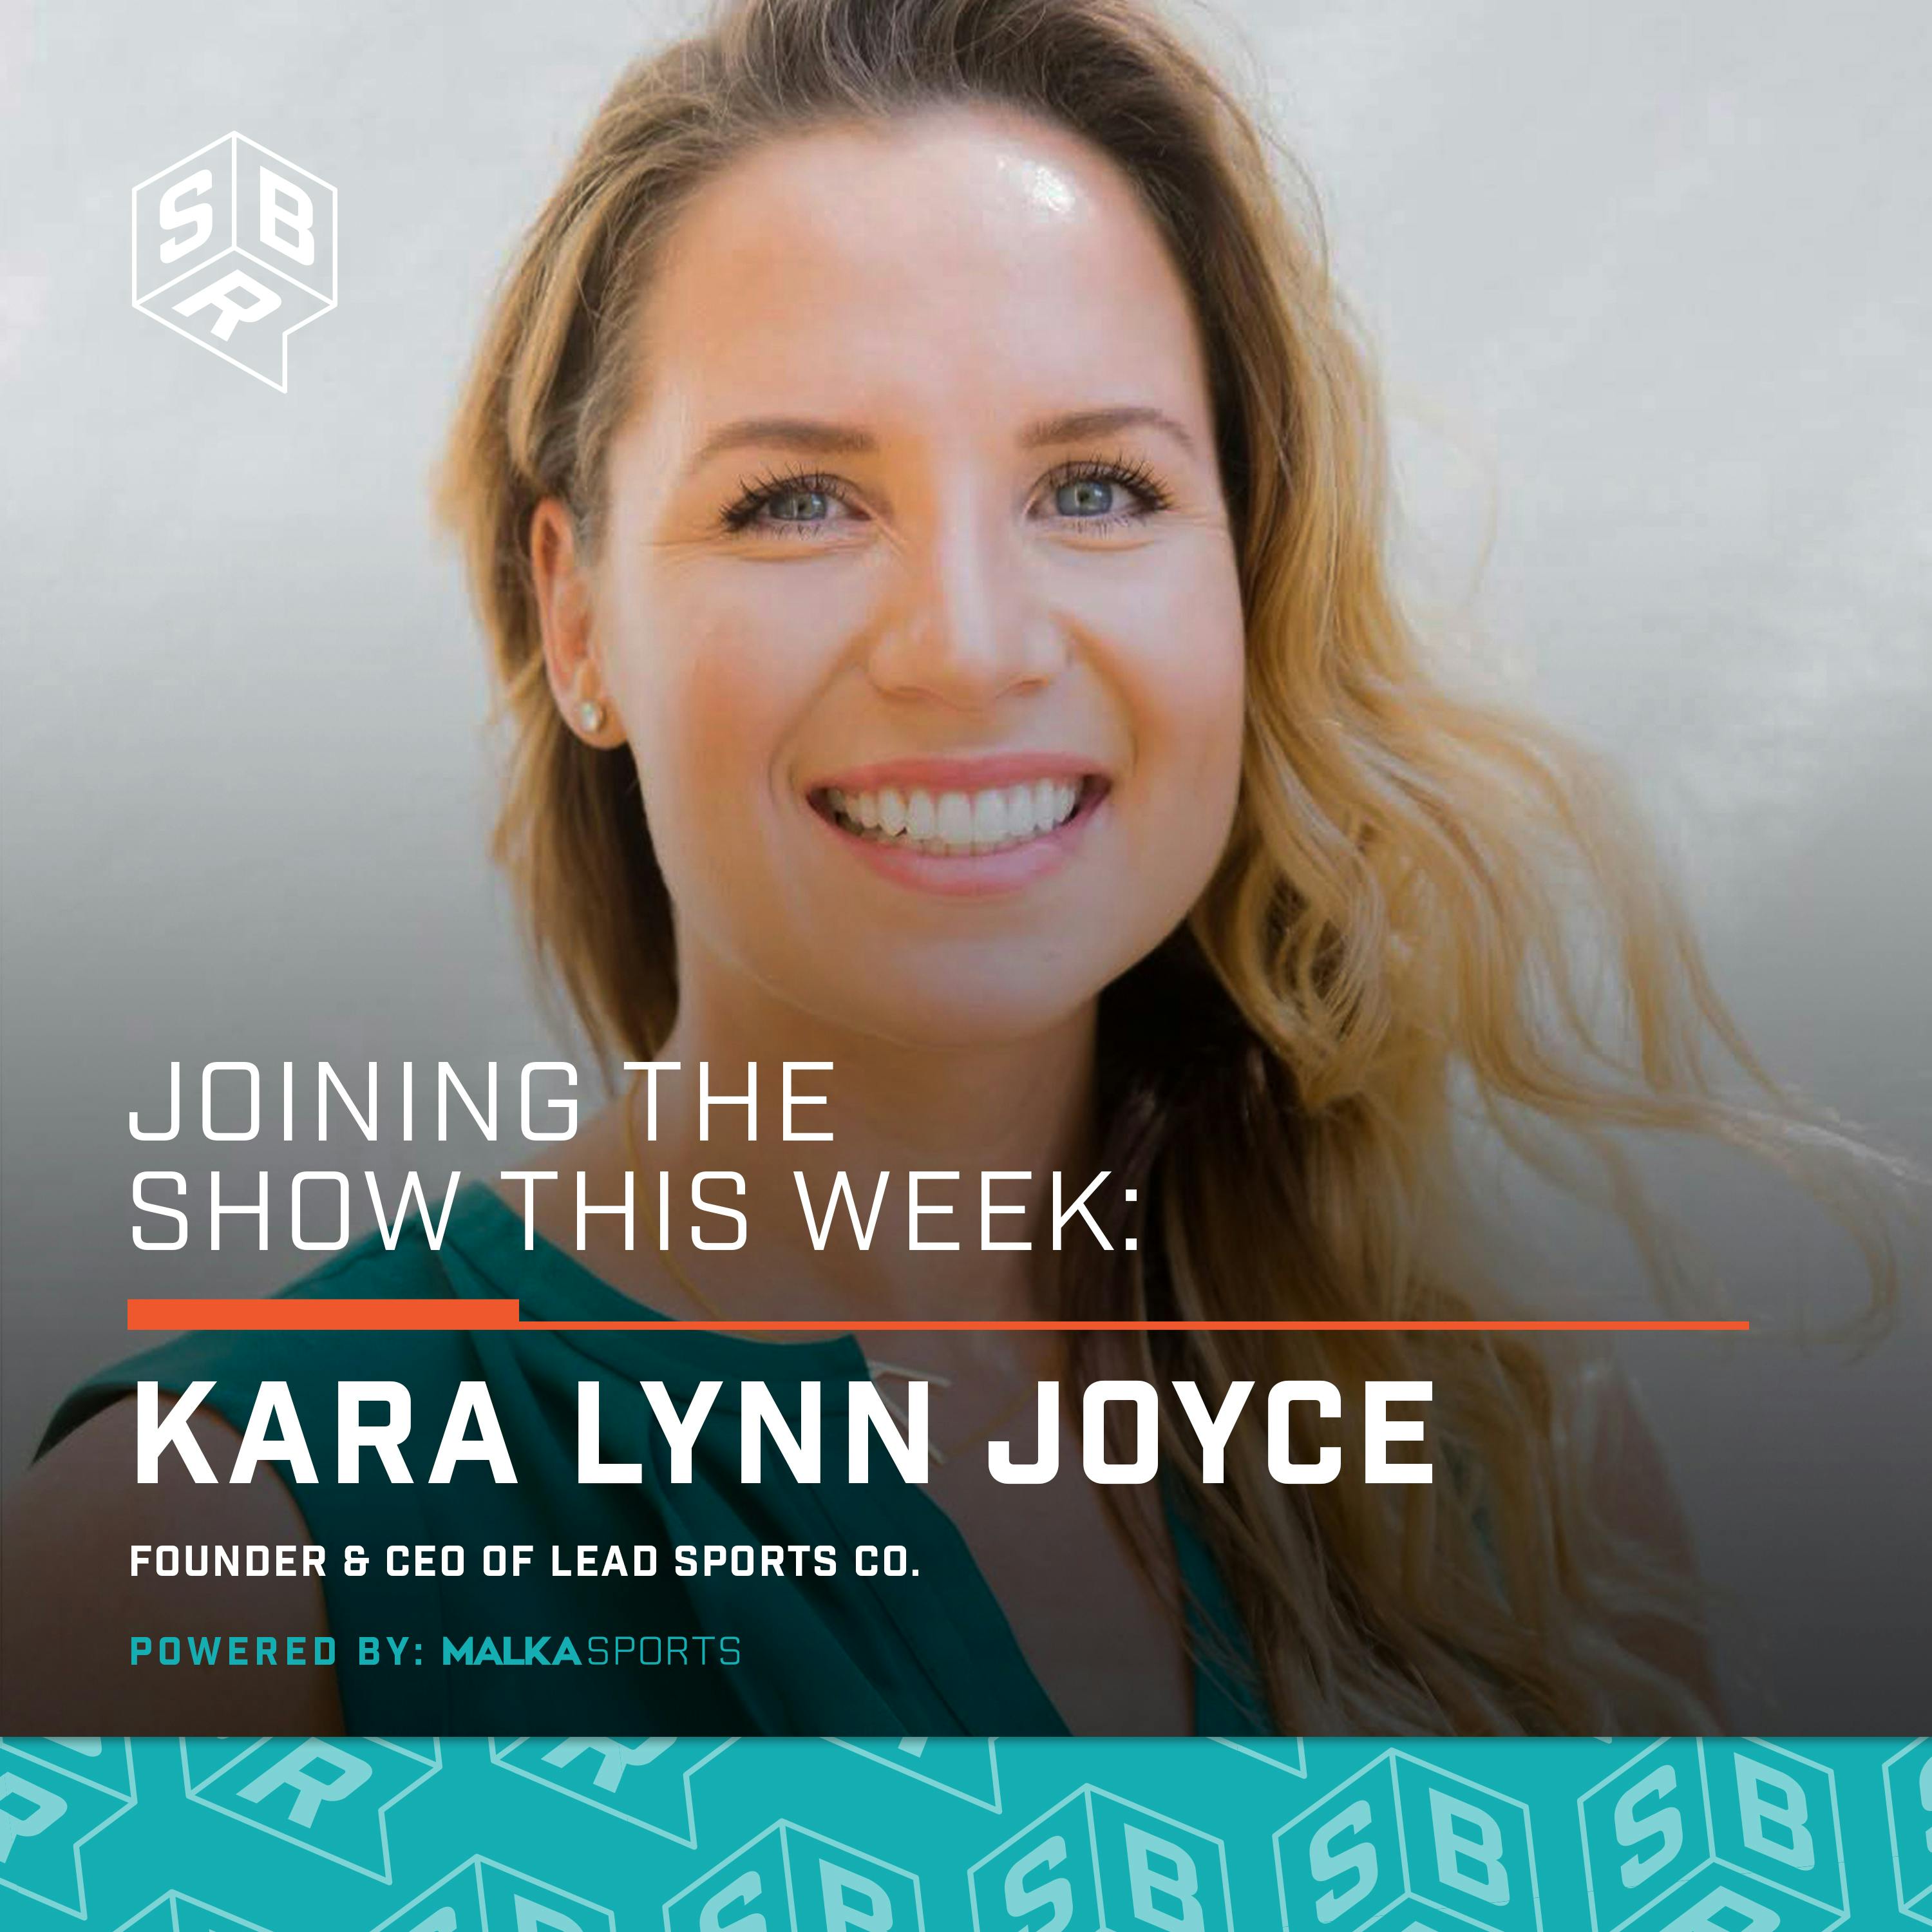 Kara Lynn Joyce - 3-Time Olympian and Founder and CEO of Lead Sports Co